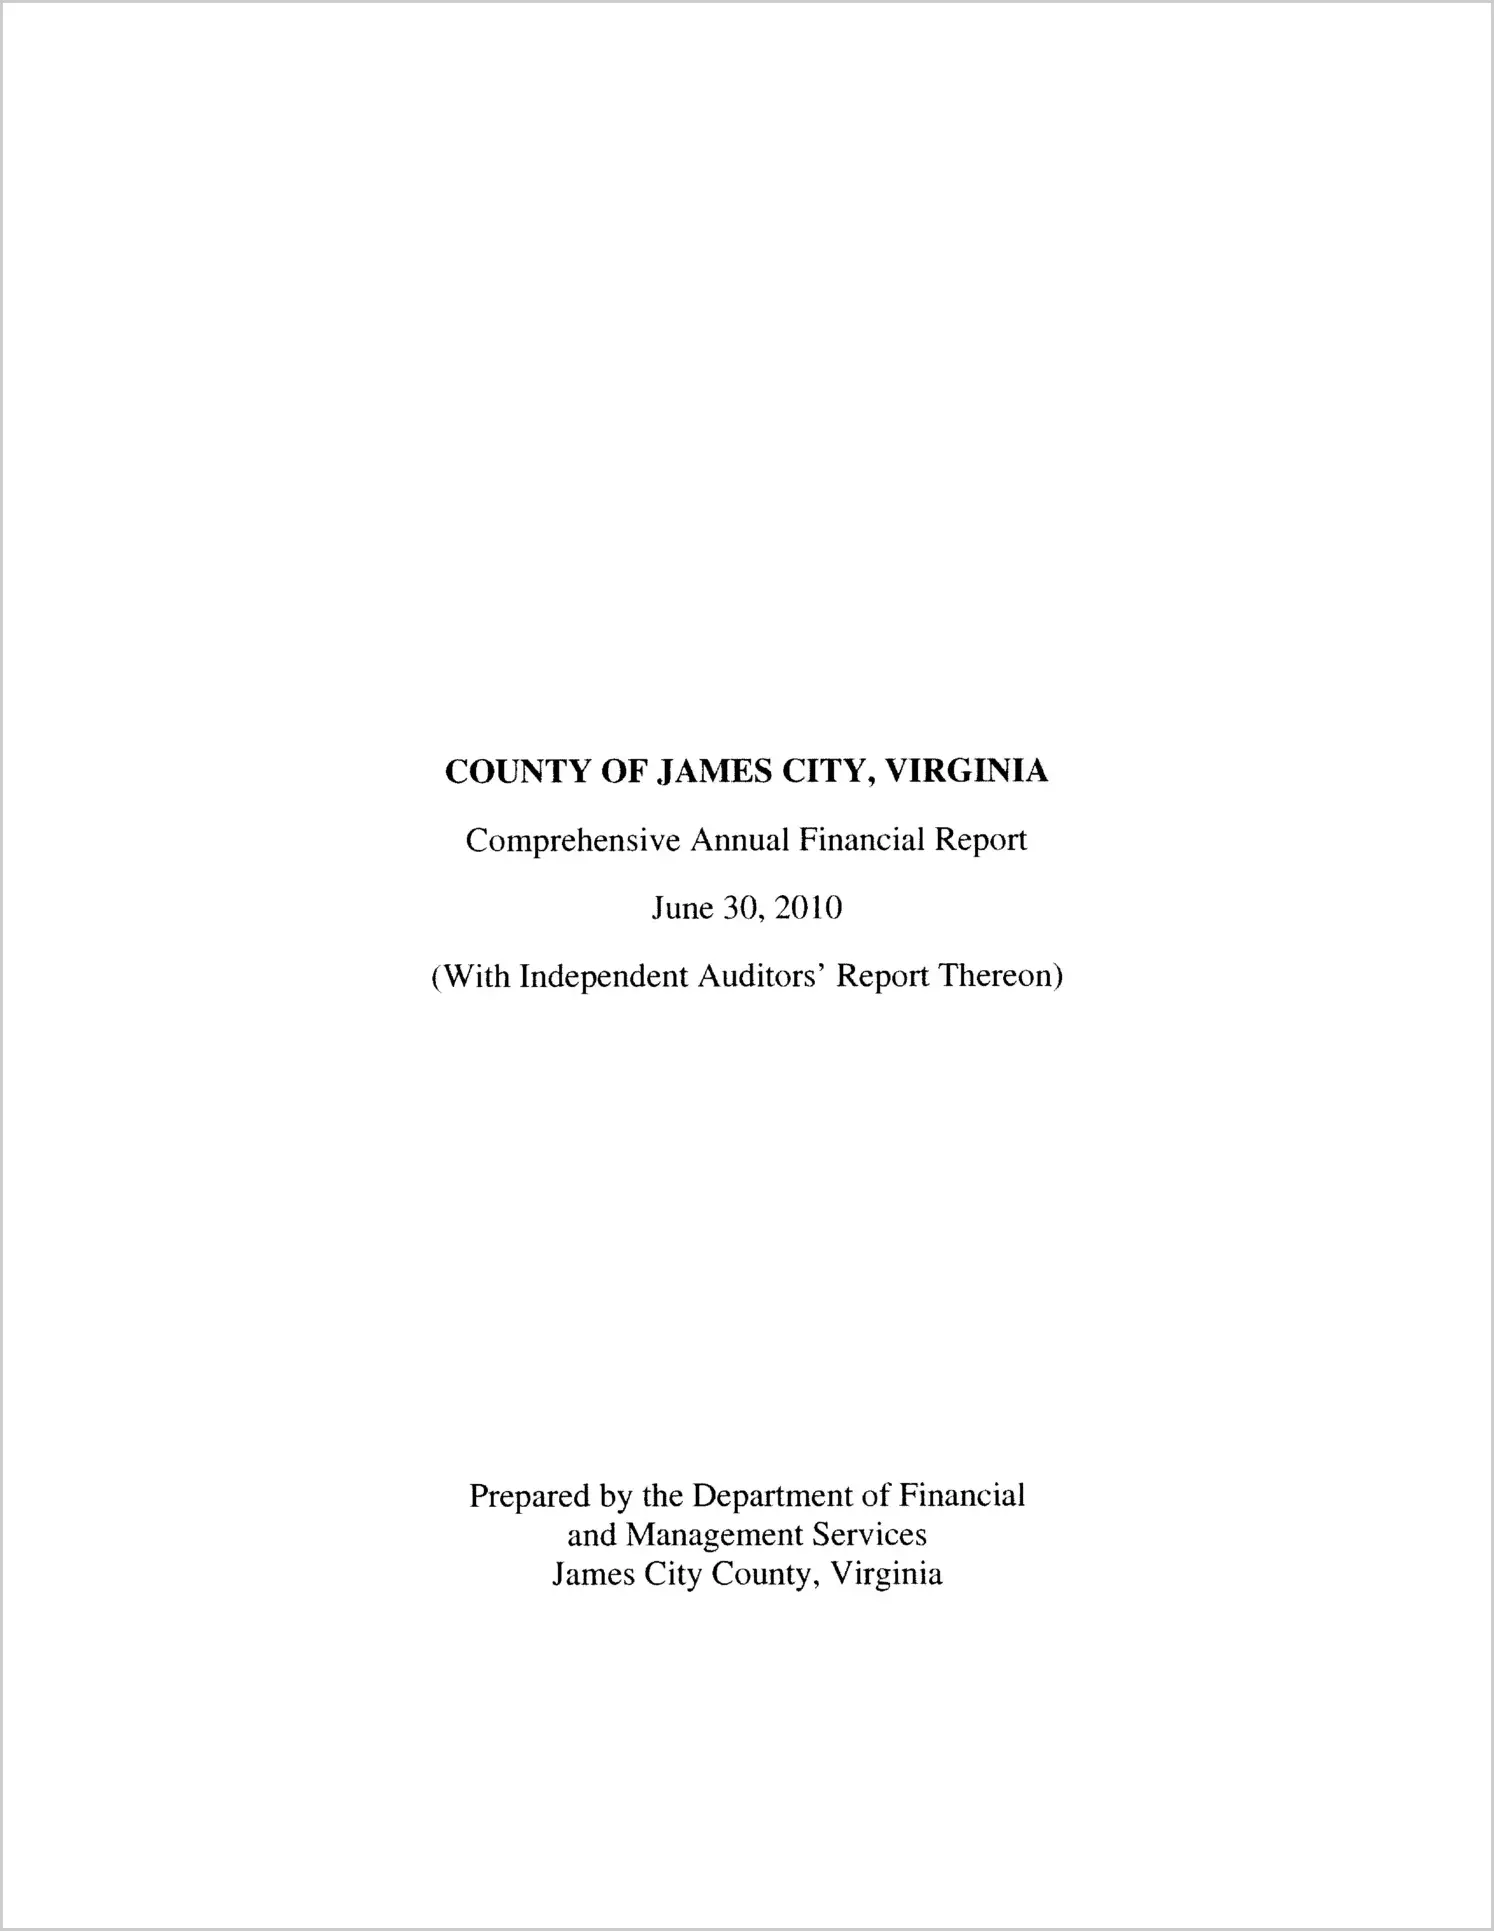 2010 Annual Financial Report for County of James City